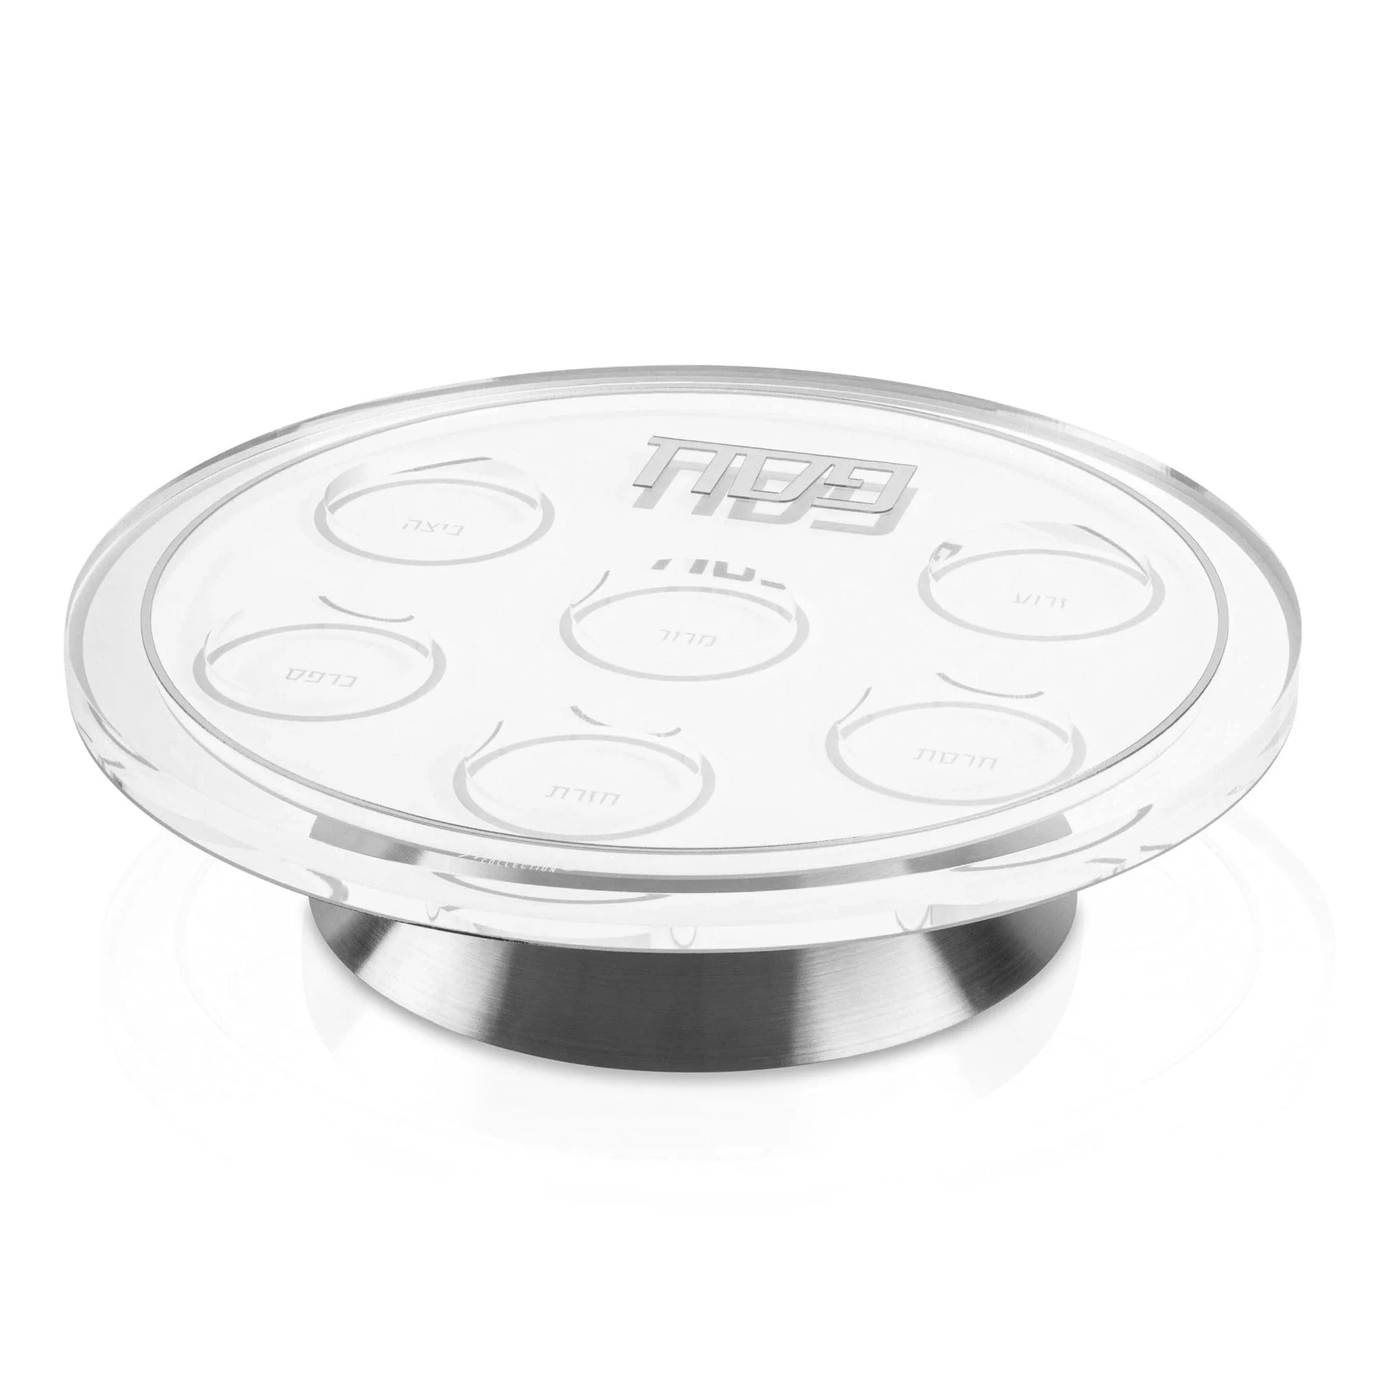 Classic 2.0 Silver Seder Plate (1 Count)